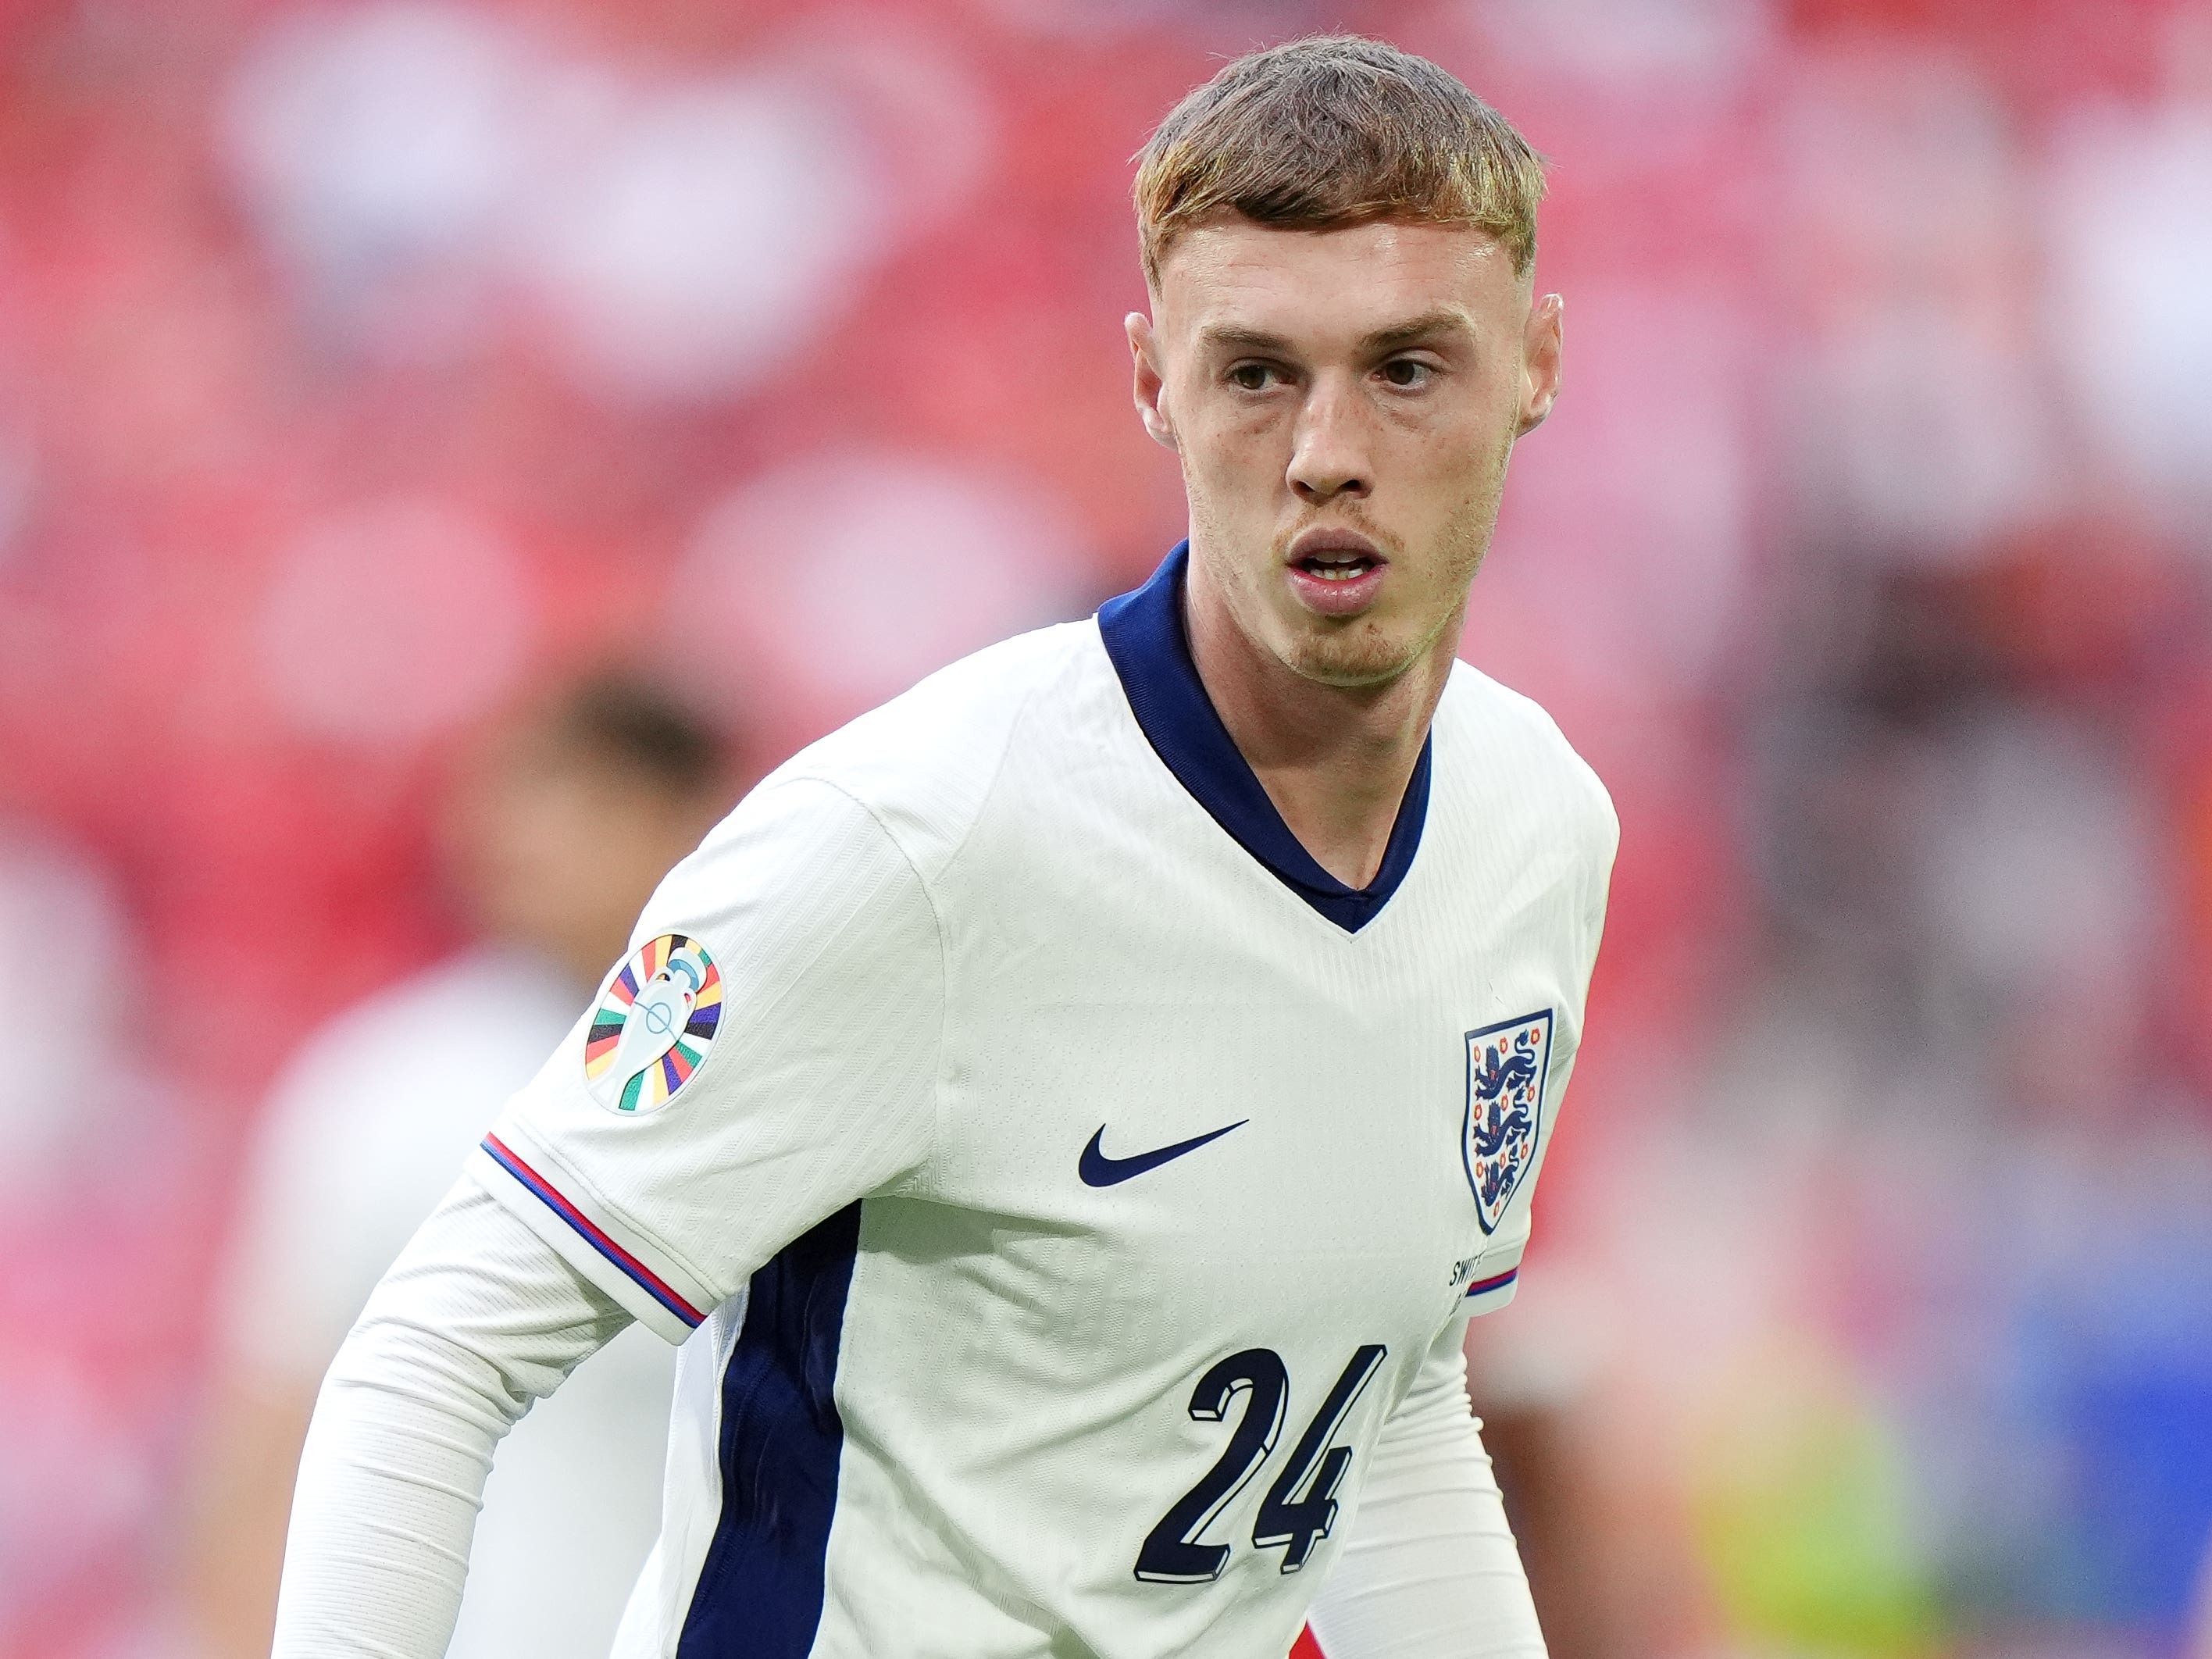 Cole Palmer hoping England can ‘finish the job’ against Spain